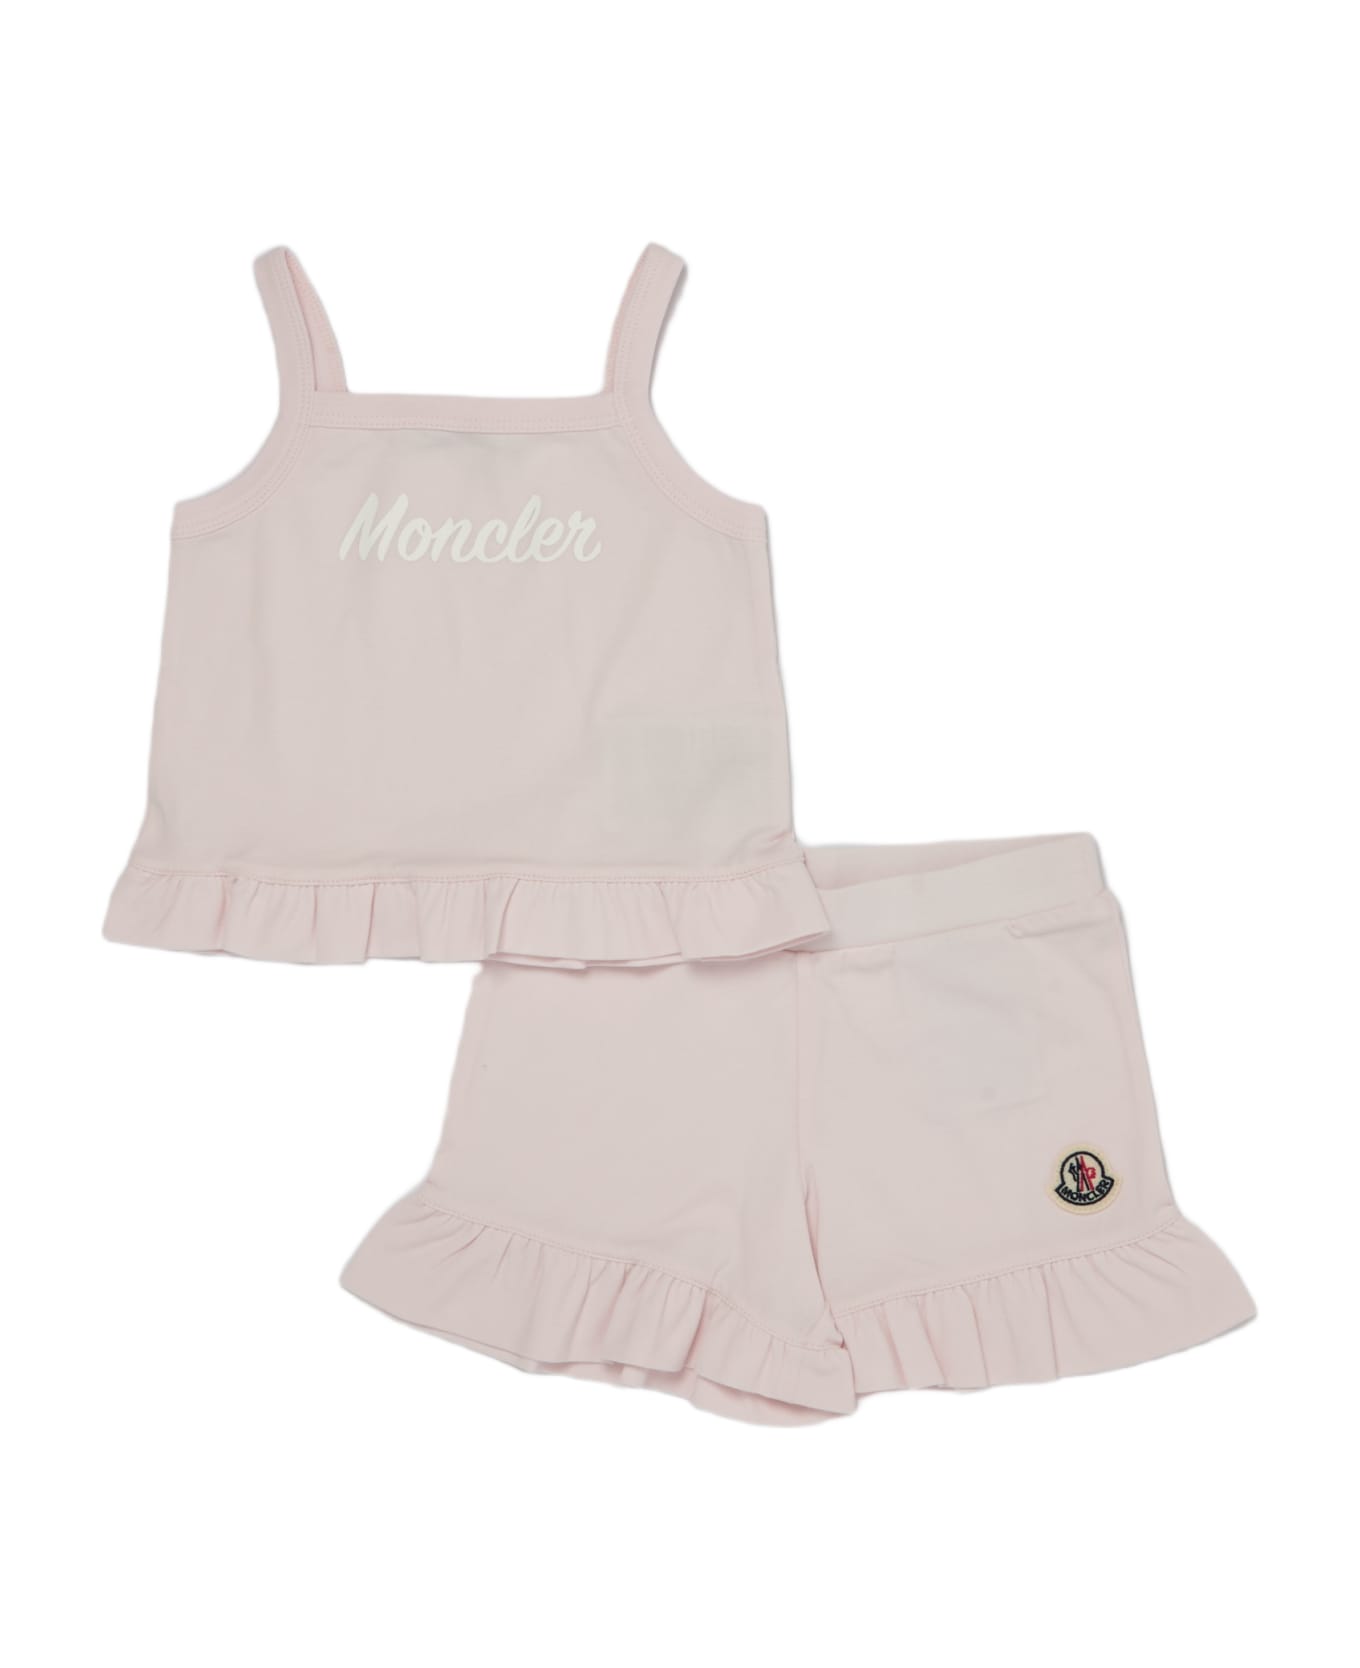 Moncler Top+shorts Suit - ROSA ボディスーツ＆セットアップ